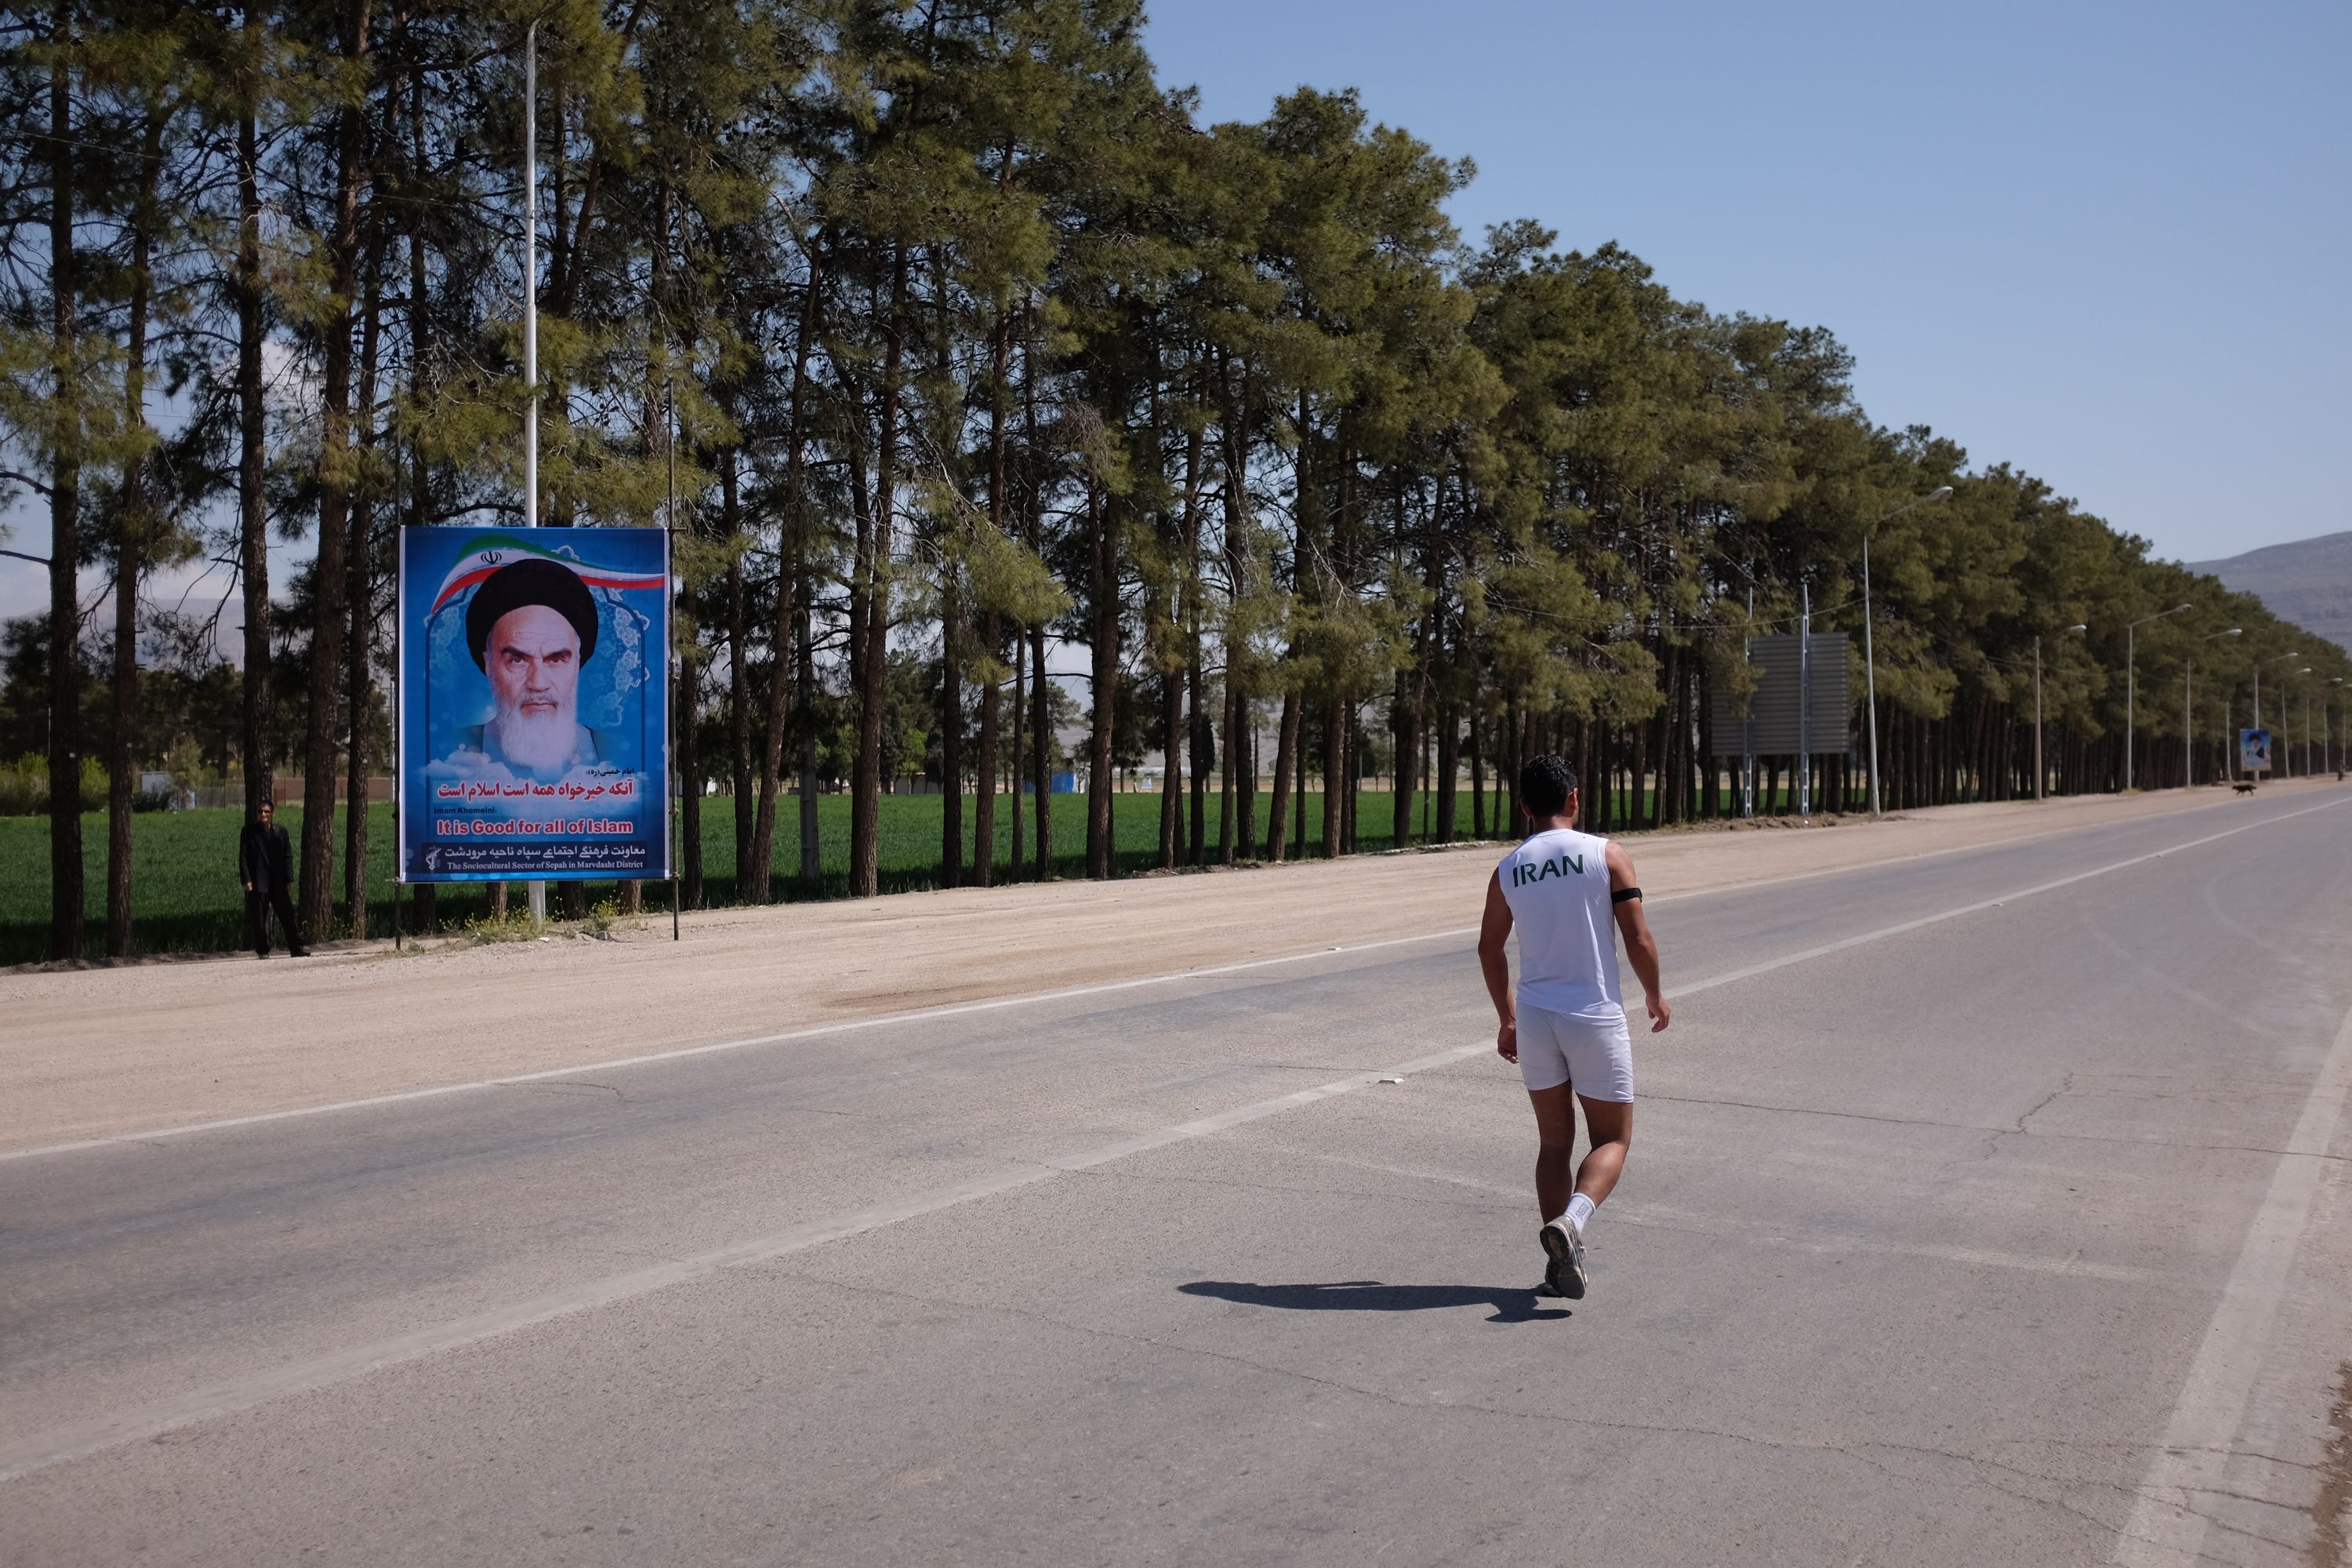 A man in white running clothes jogs past a picture of Ayatollah Khomeini on a very straight country road.